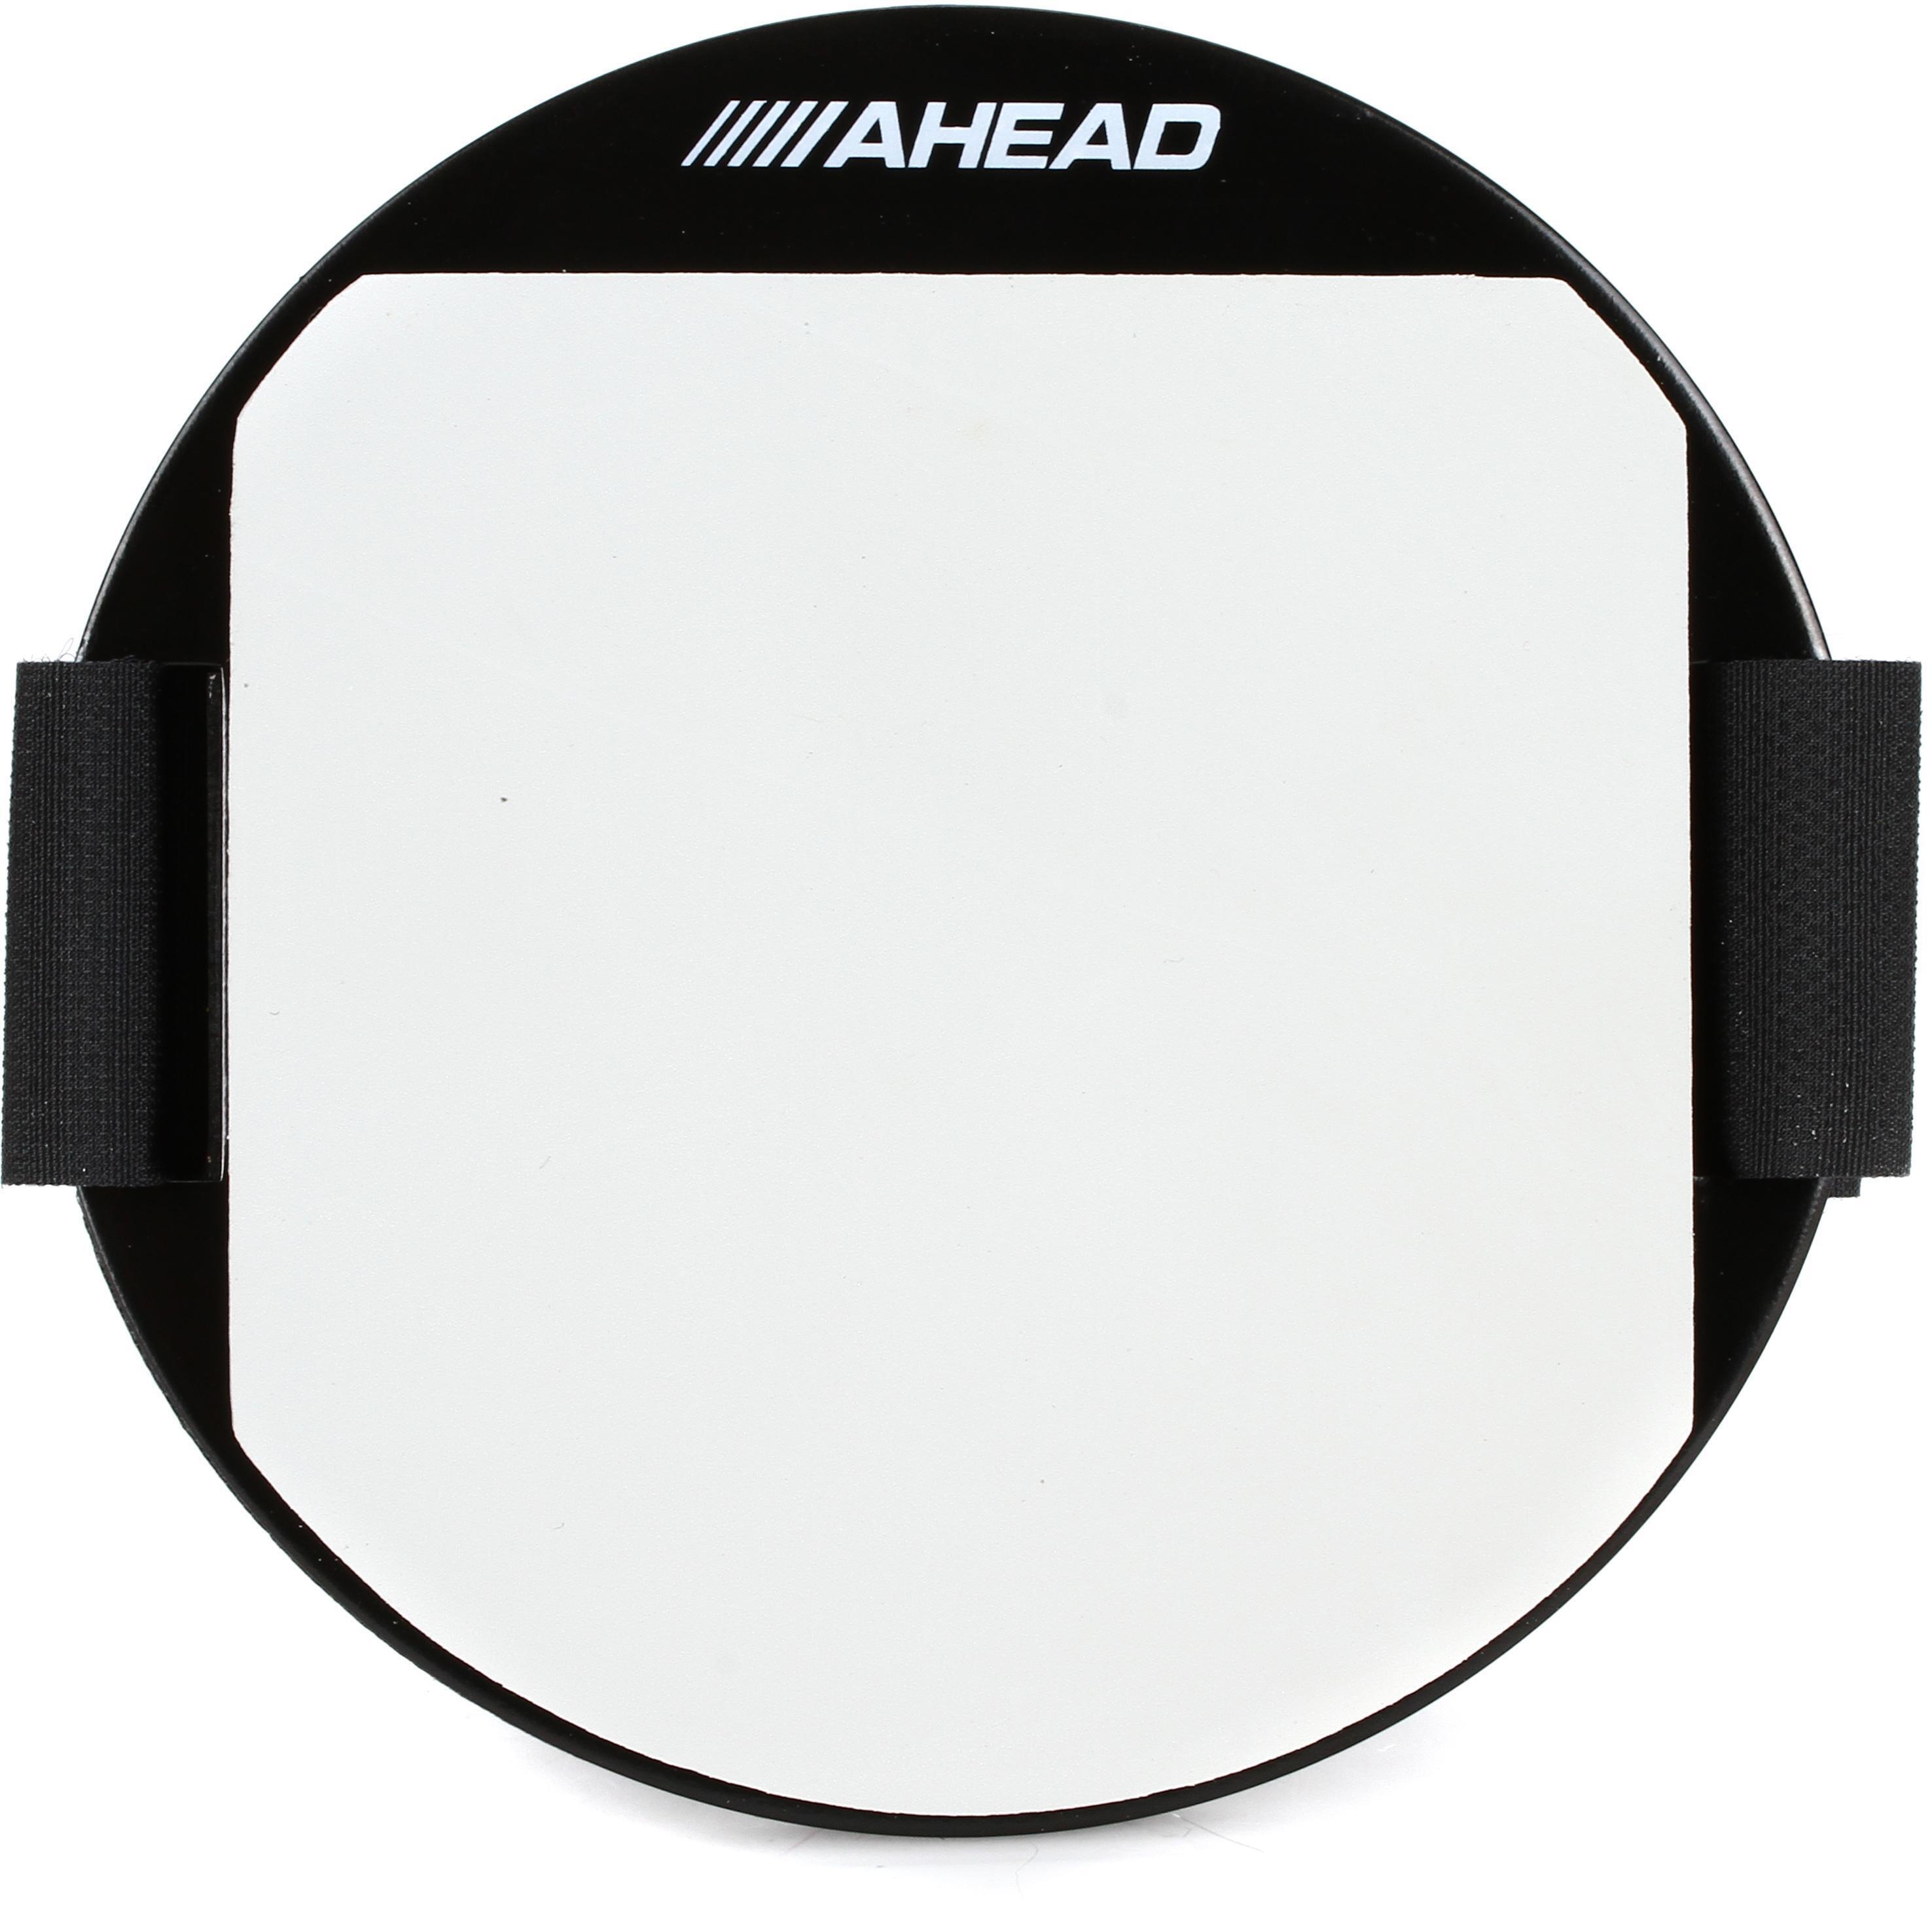 Ahead Strap-on Practice Pad - 5-inch